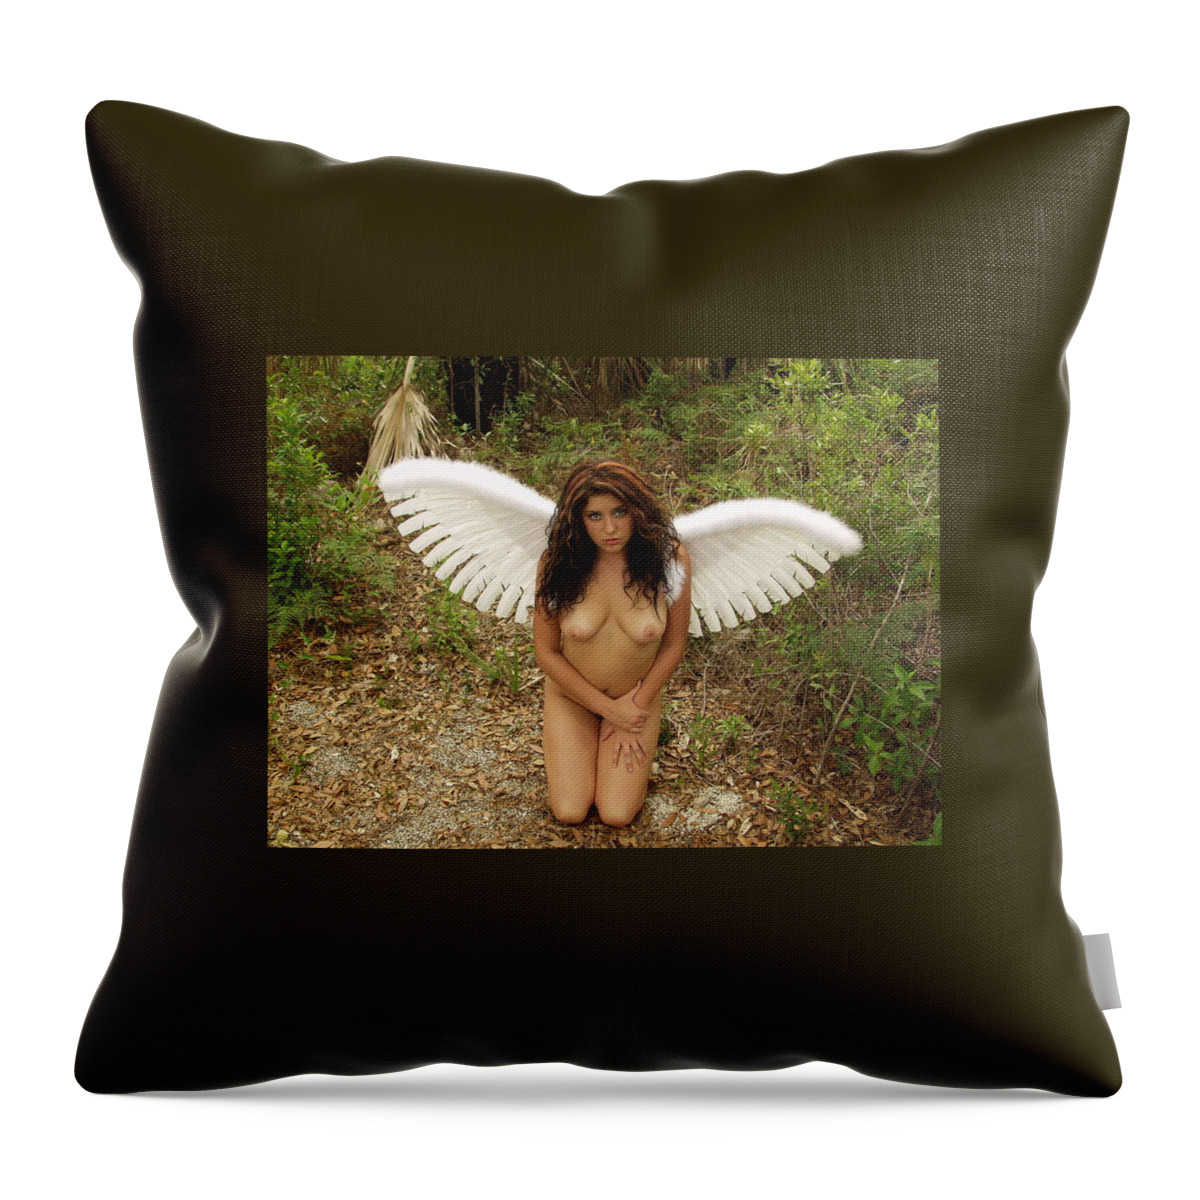 Everglades City Fl.professional Photographer Lucky Cole Throw Pillow featuring the photograph Everglades City Fl. Professional Photographer 4176 by Lucky Cole